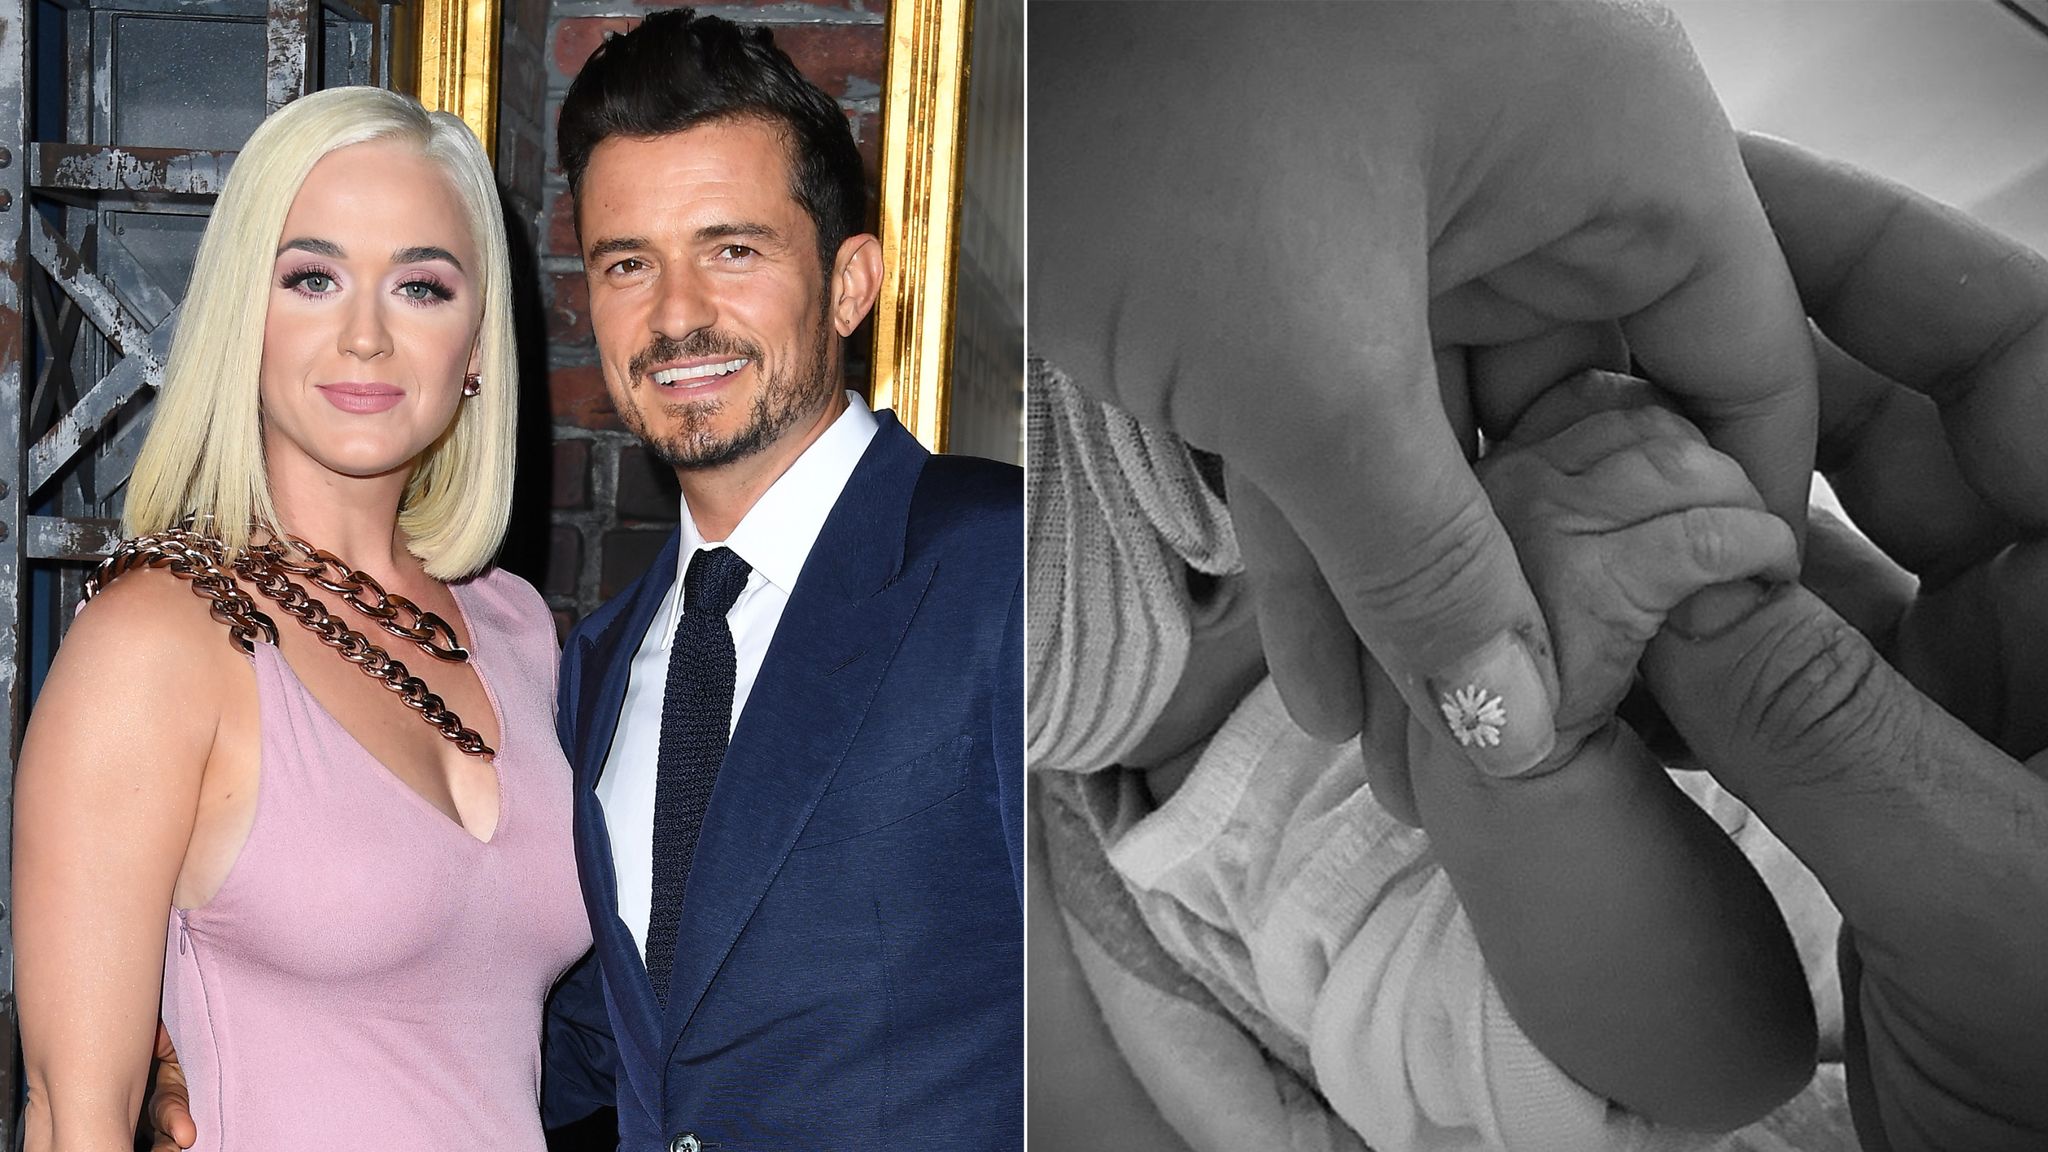 Katy Perry And Orlando Bloom Welcome Baby Girl And Reveal Her Name Ents Arts News Sky News